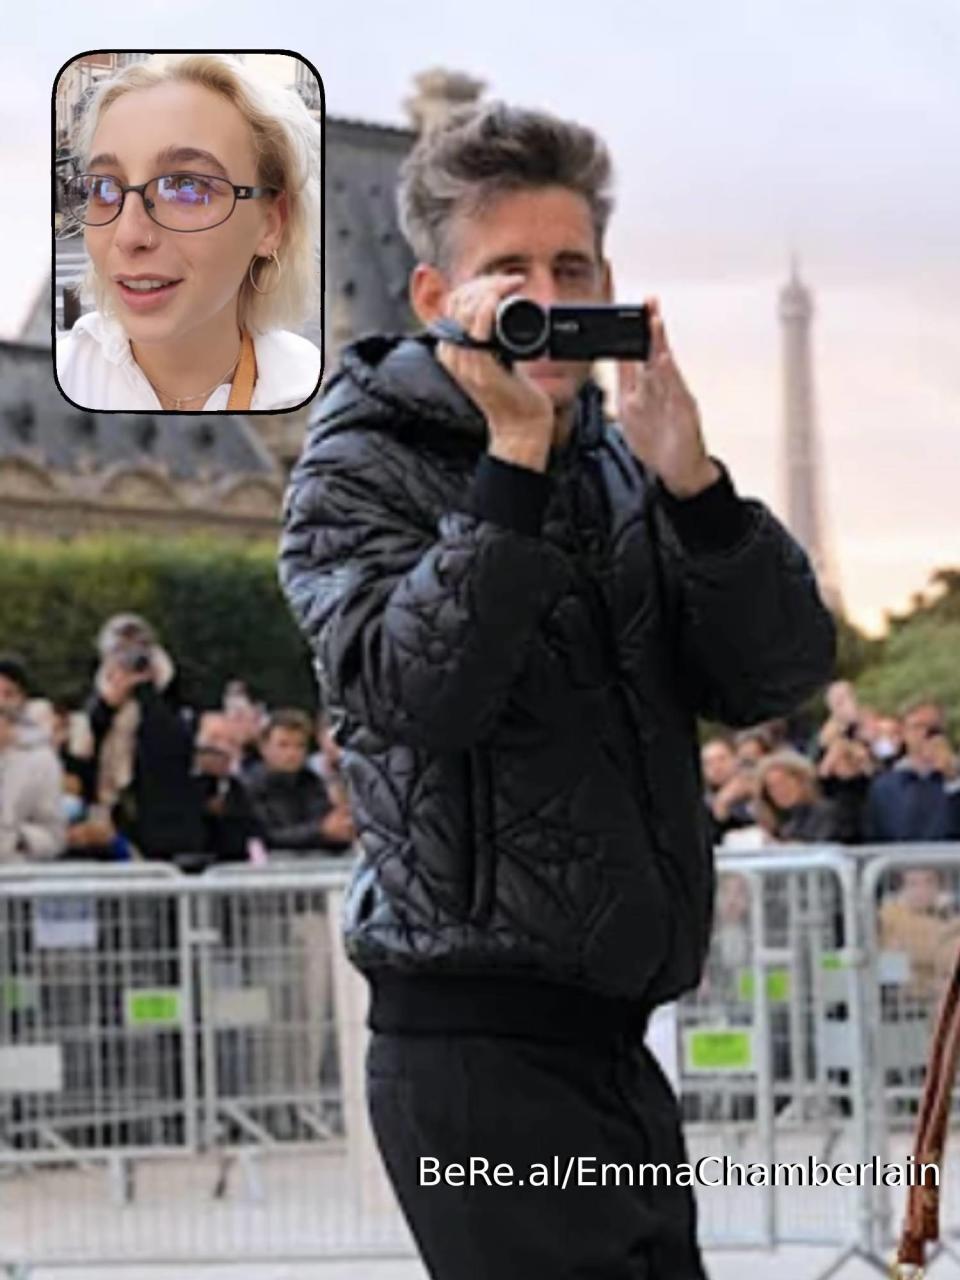 Emma Chamberlain looking at her father, who is recording her on a camcorder